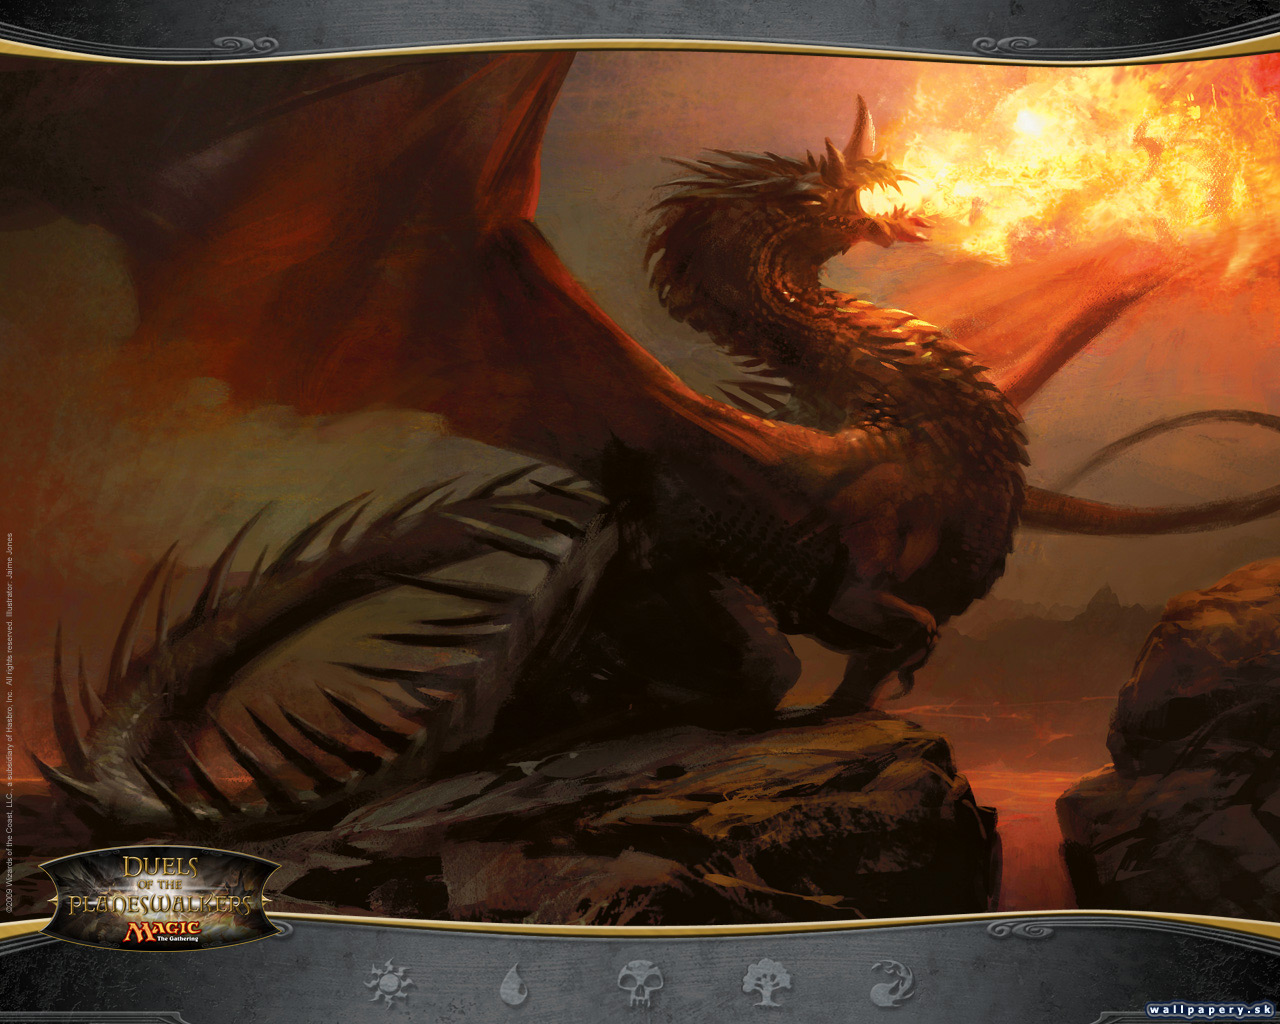 Magic: The Gathering - Duels of the Planeswalkers - wallpaper 3